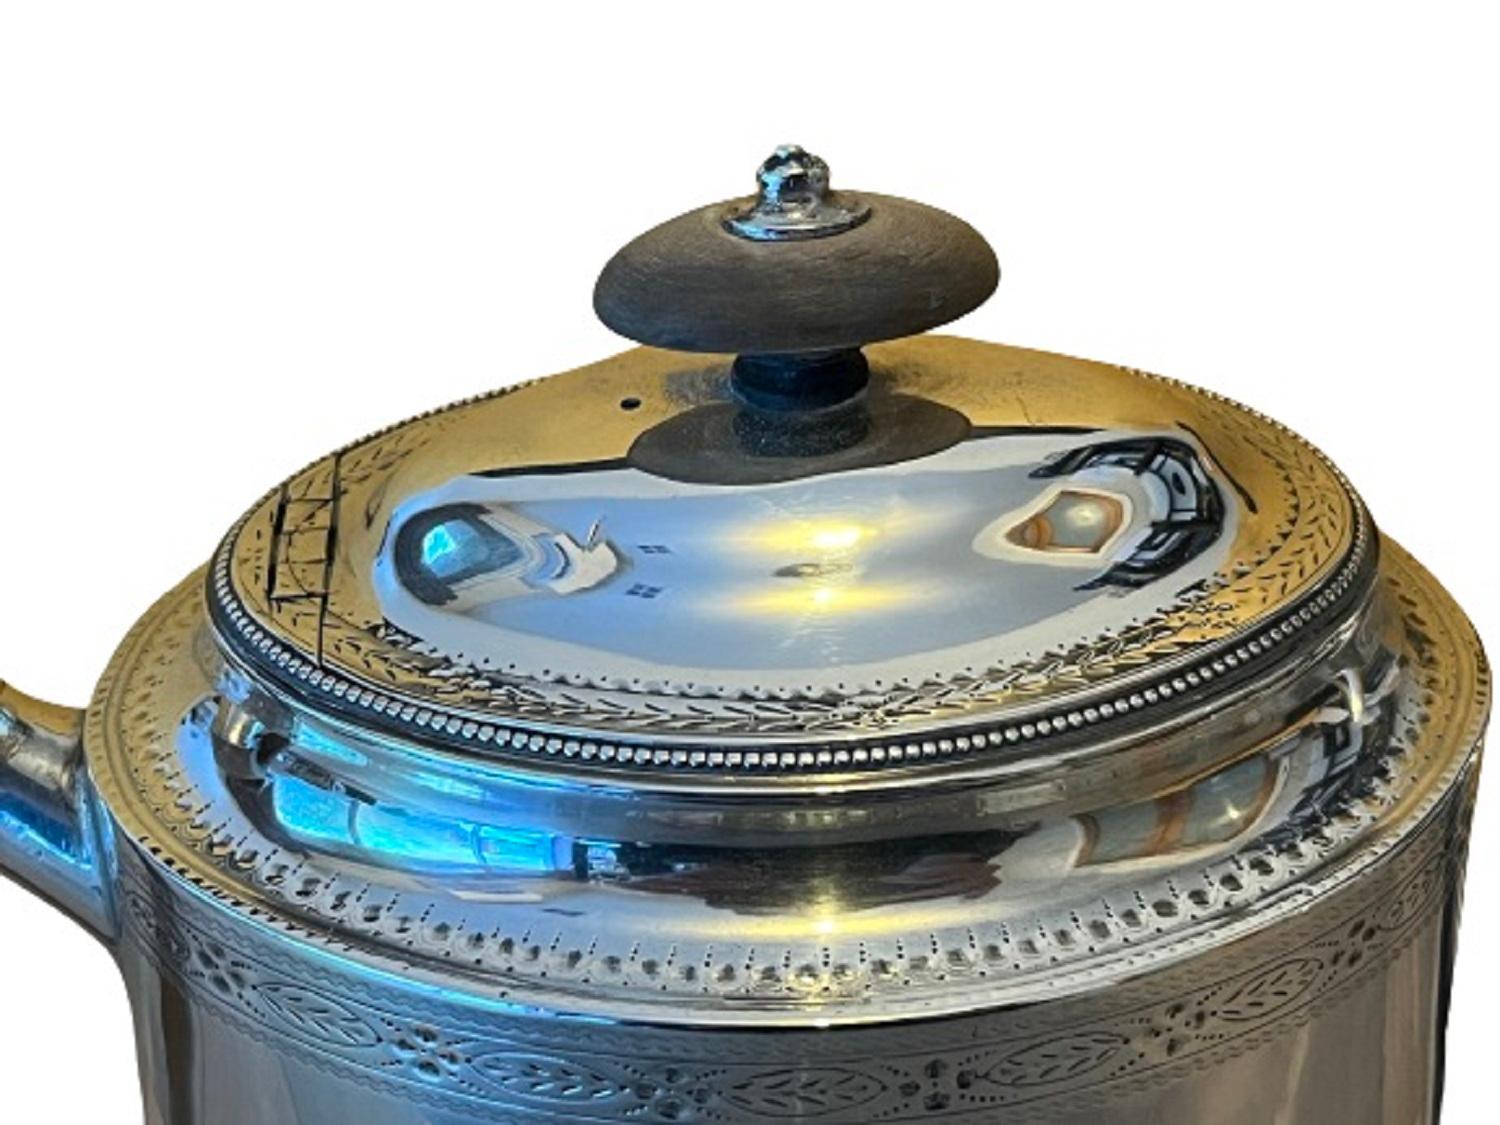 HESTER BATEMAN
A very attractive George III silver neoclassical teapot, oval straight-sided body with straight spout and bright-cut engraving, the domed lid with flush hinge and applied bead mount detail. The body with two blank escutcheon shaped